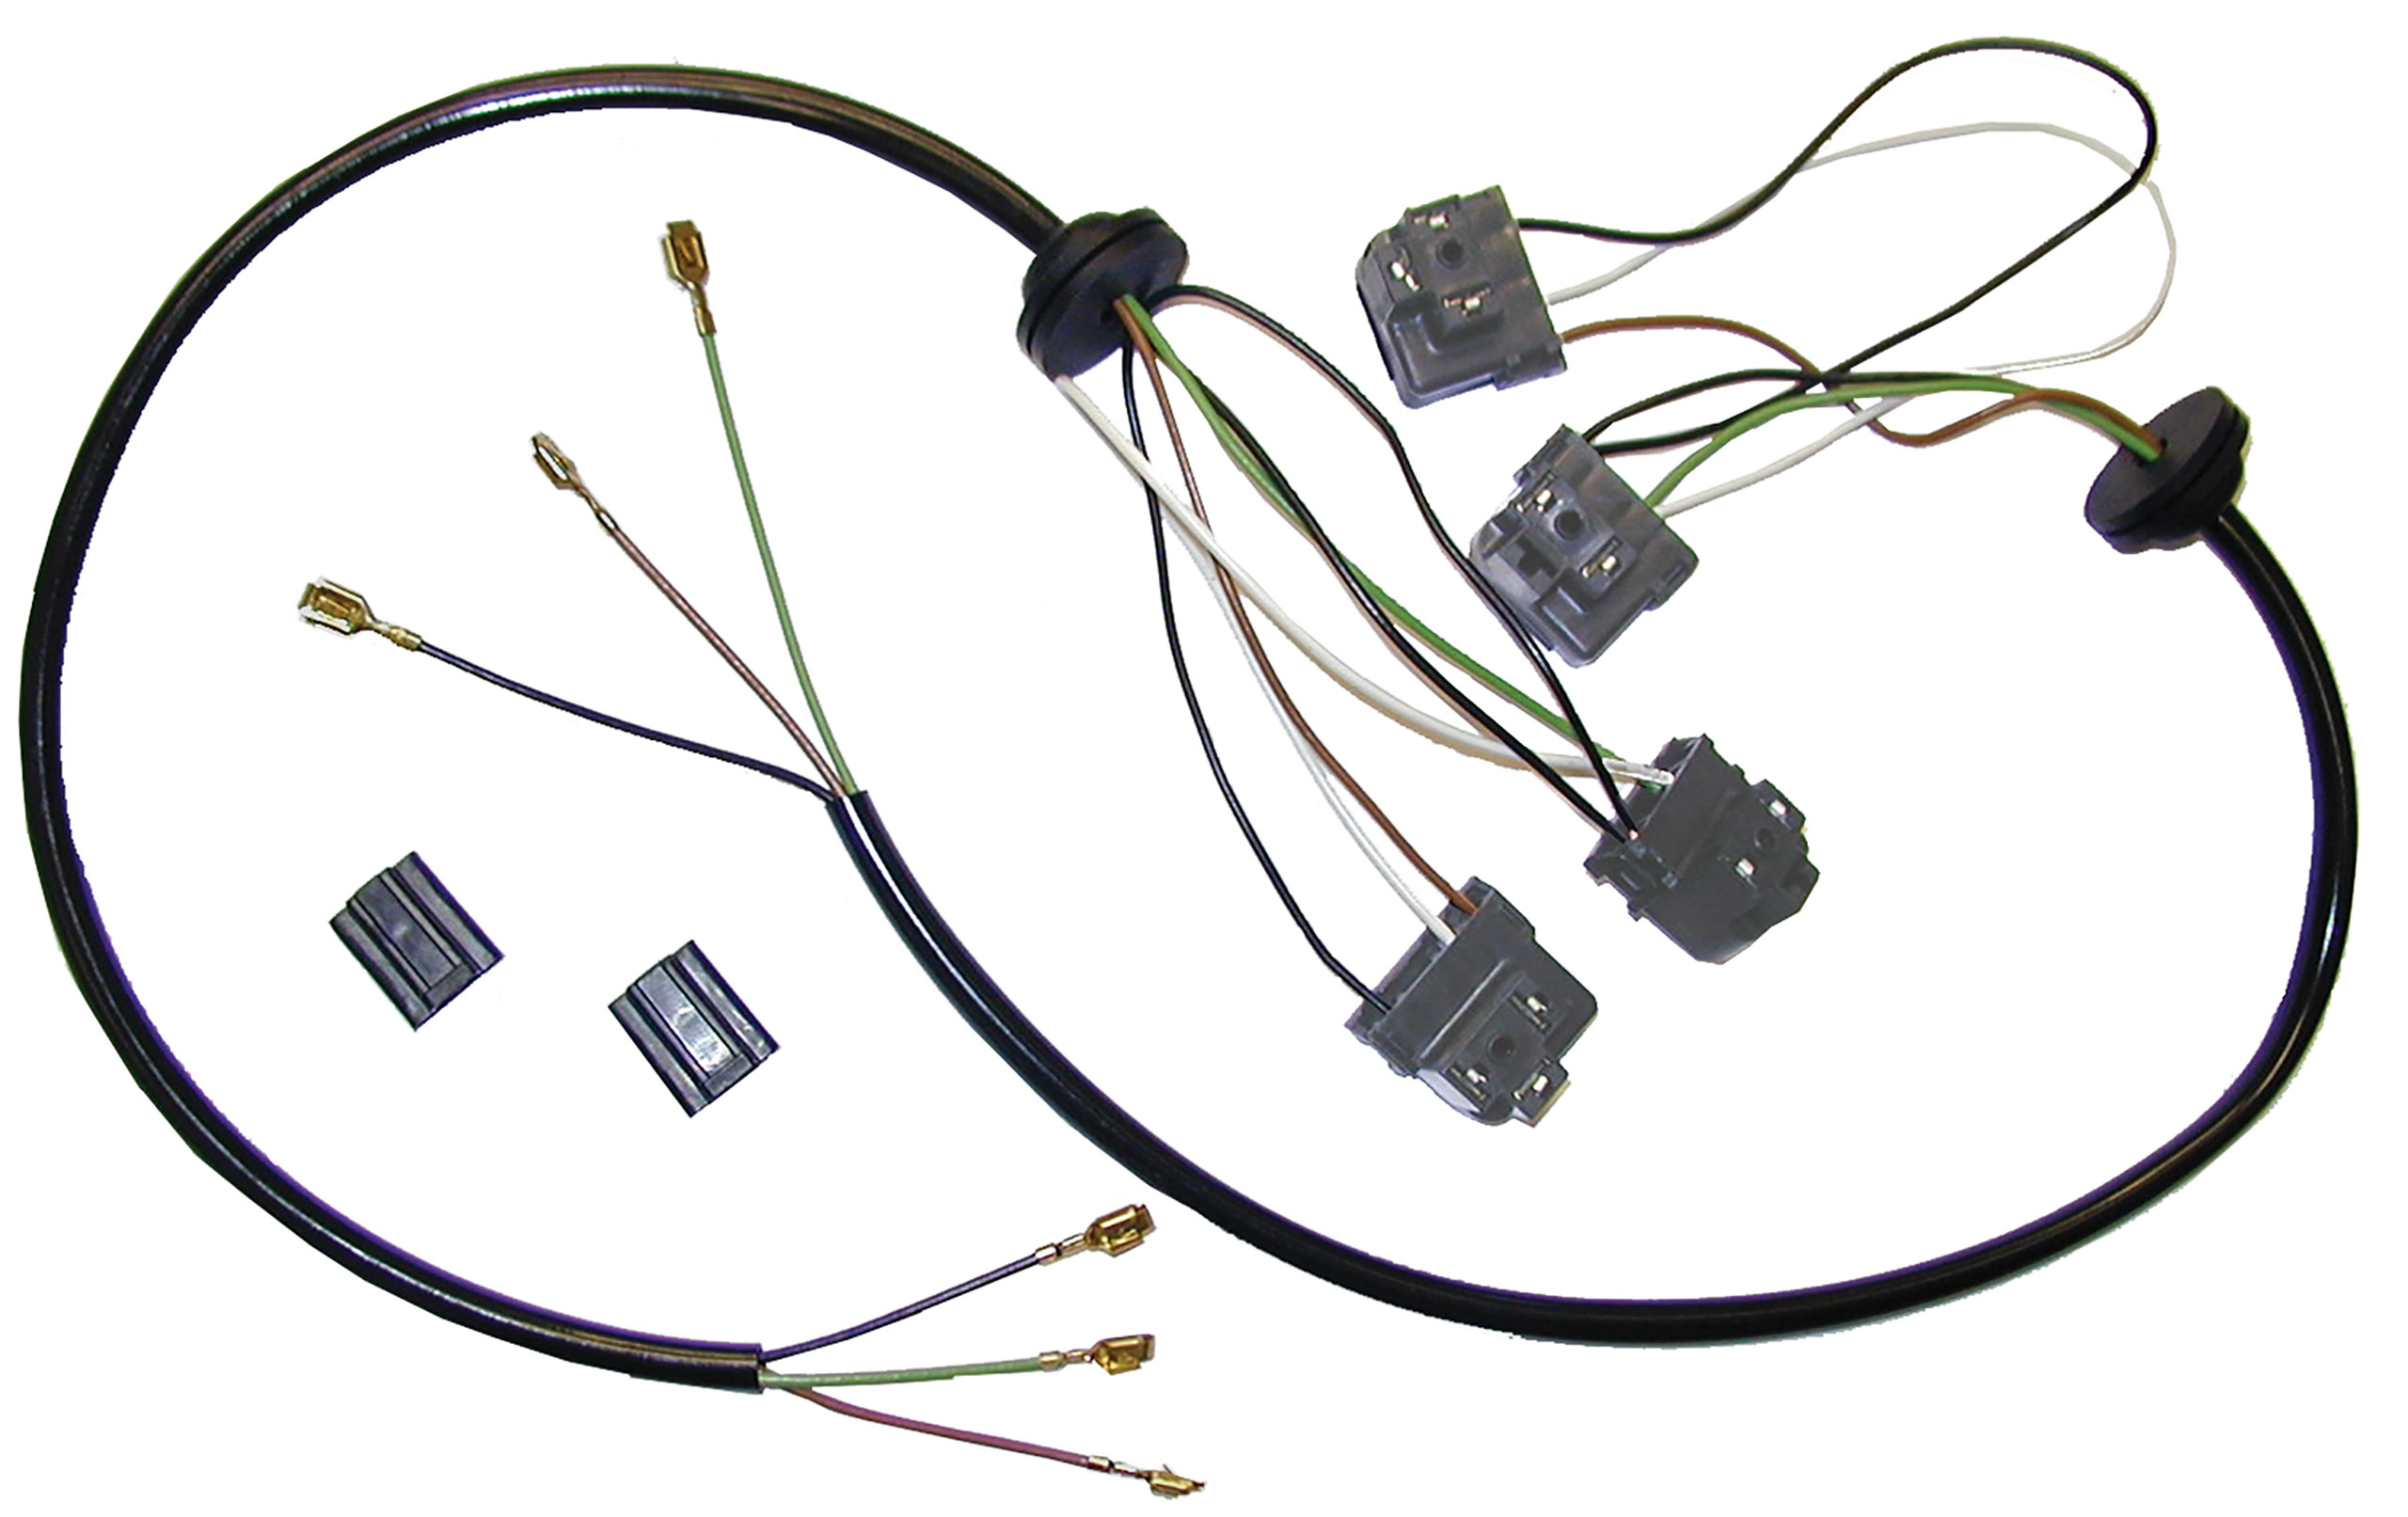 C2 1963 Chevrolet Corvette Harness. Headlight Bucket Extensions 2 Piece - Lectric Limited, Inc.